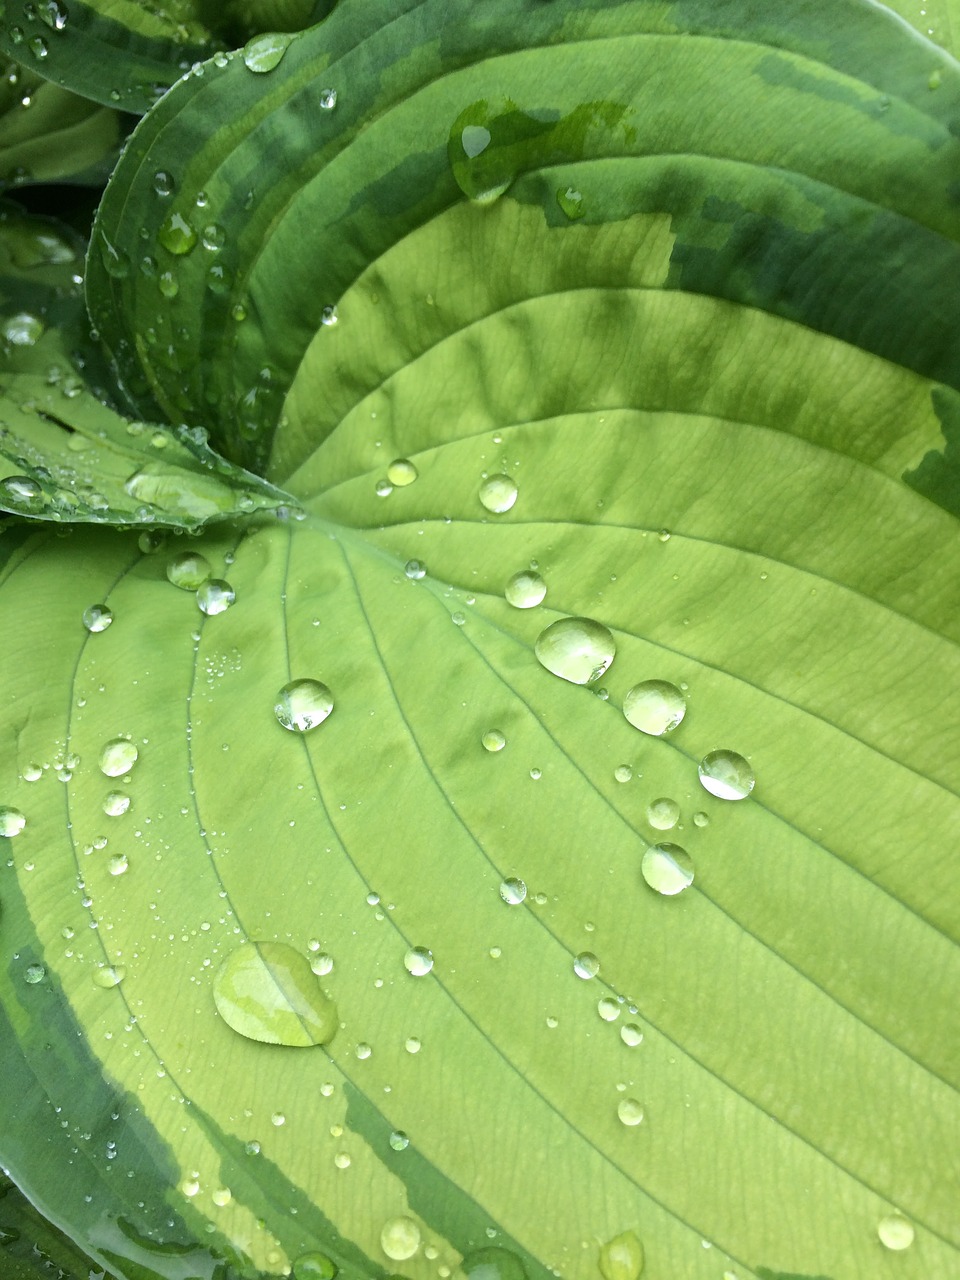 hosta water droplets free photo